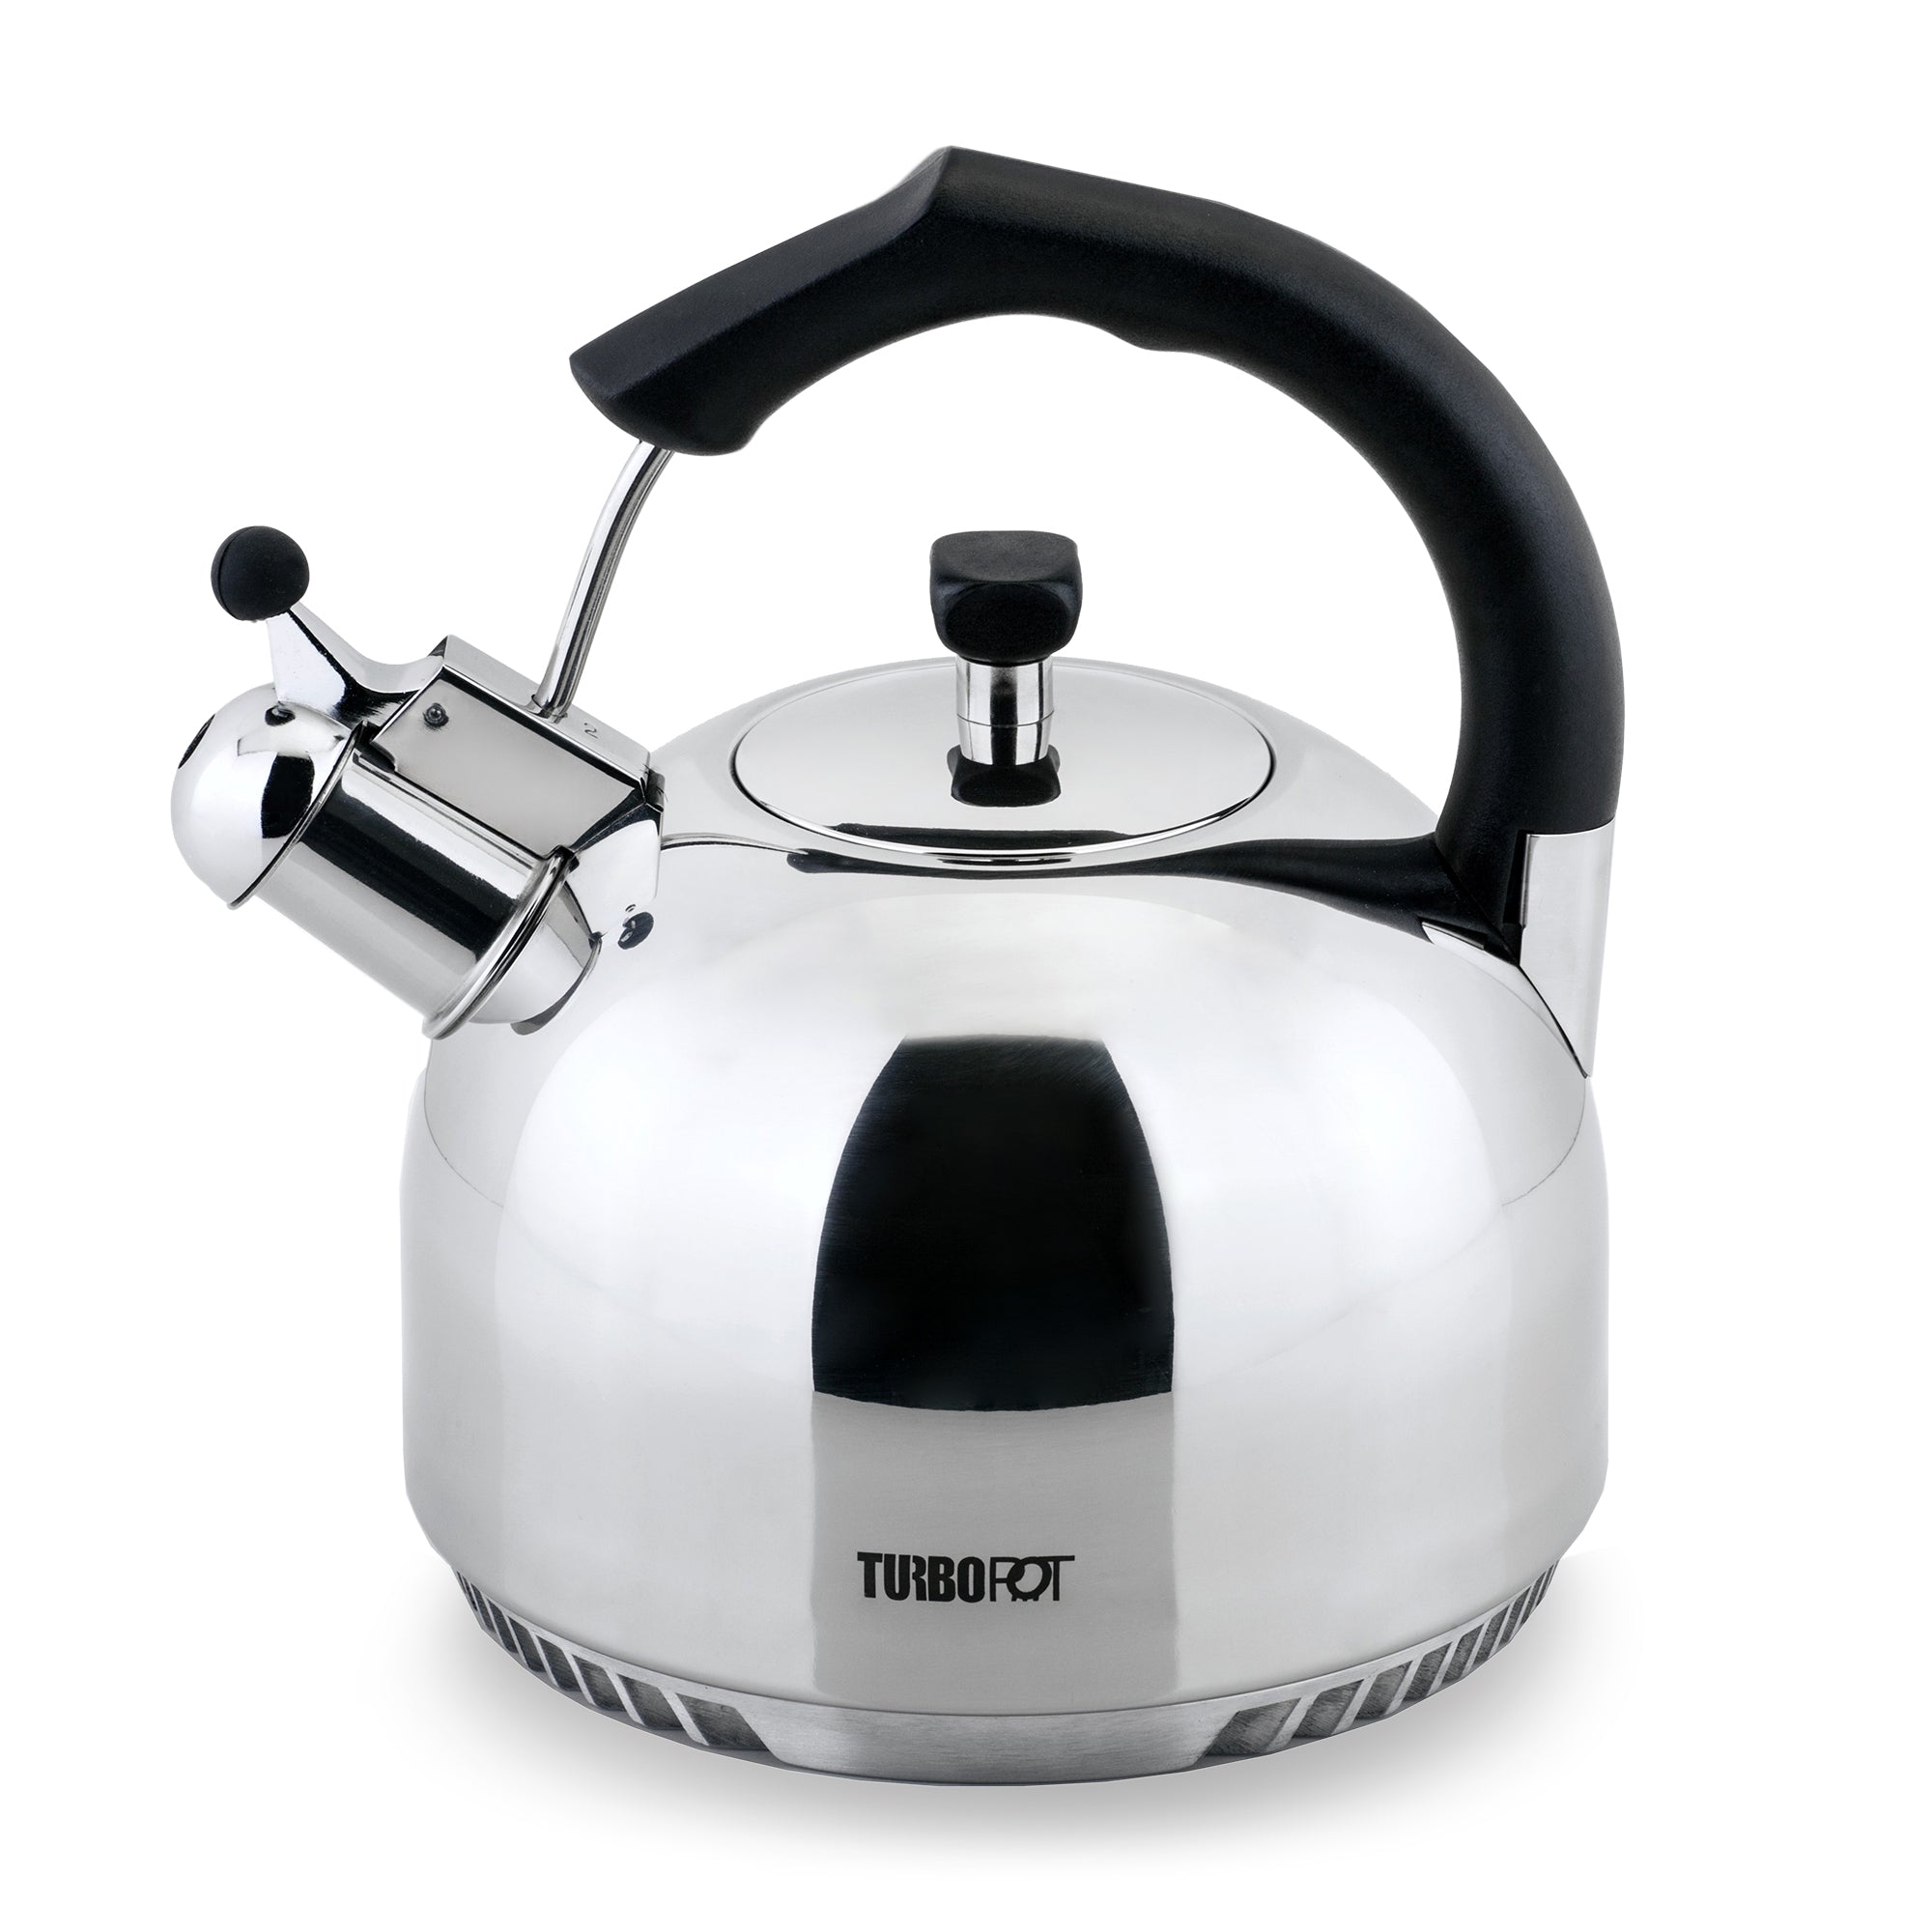 Is an Electric Tea Kettle Really Better?